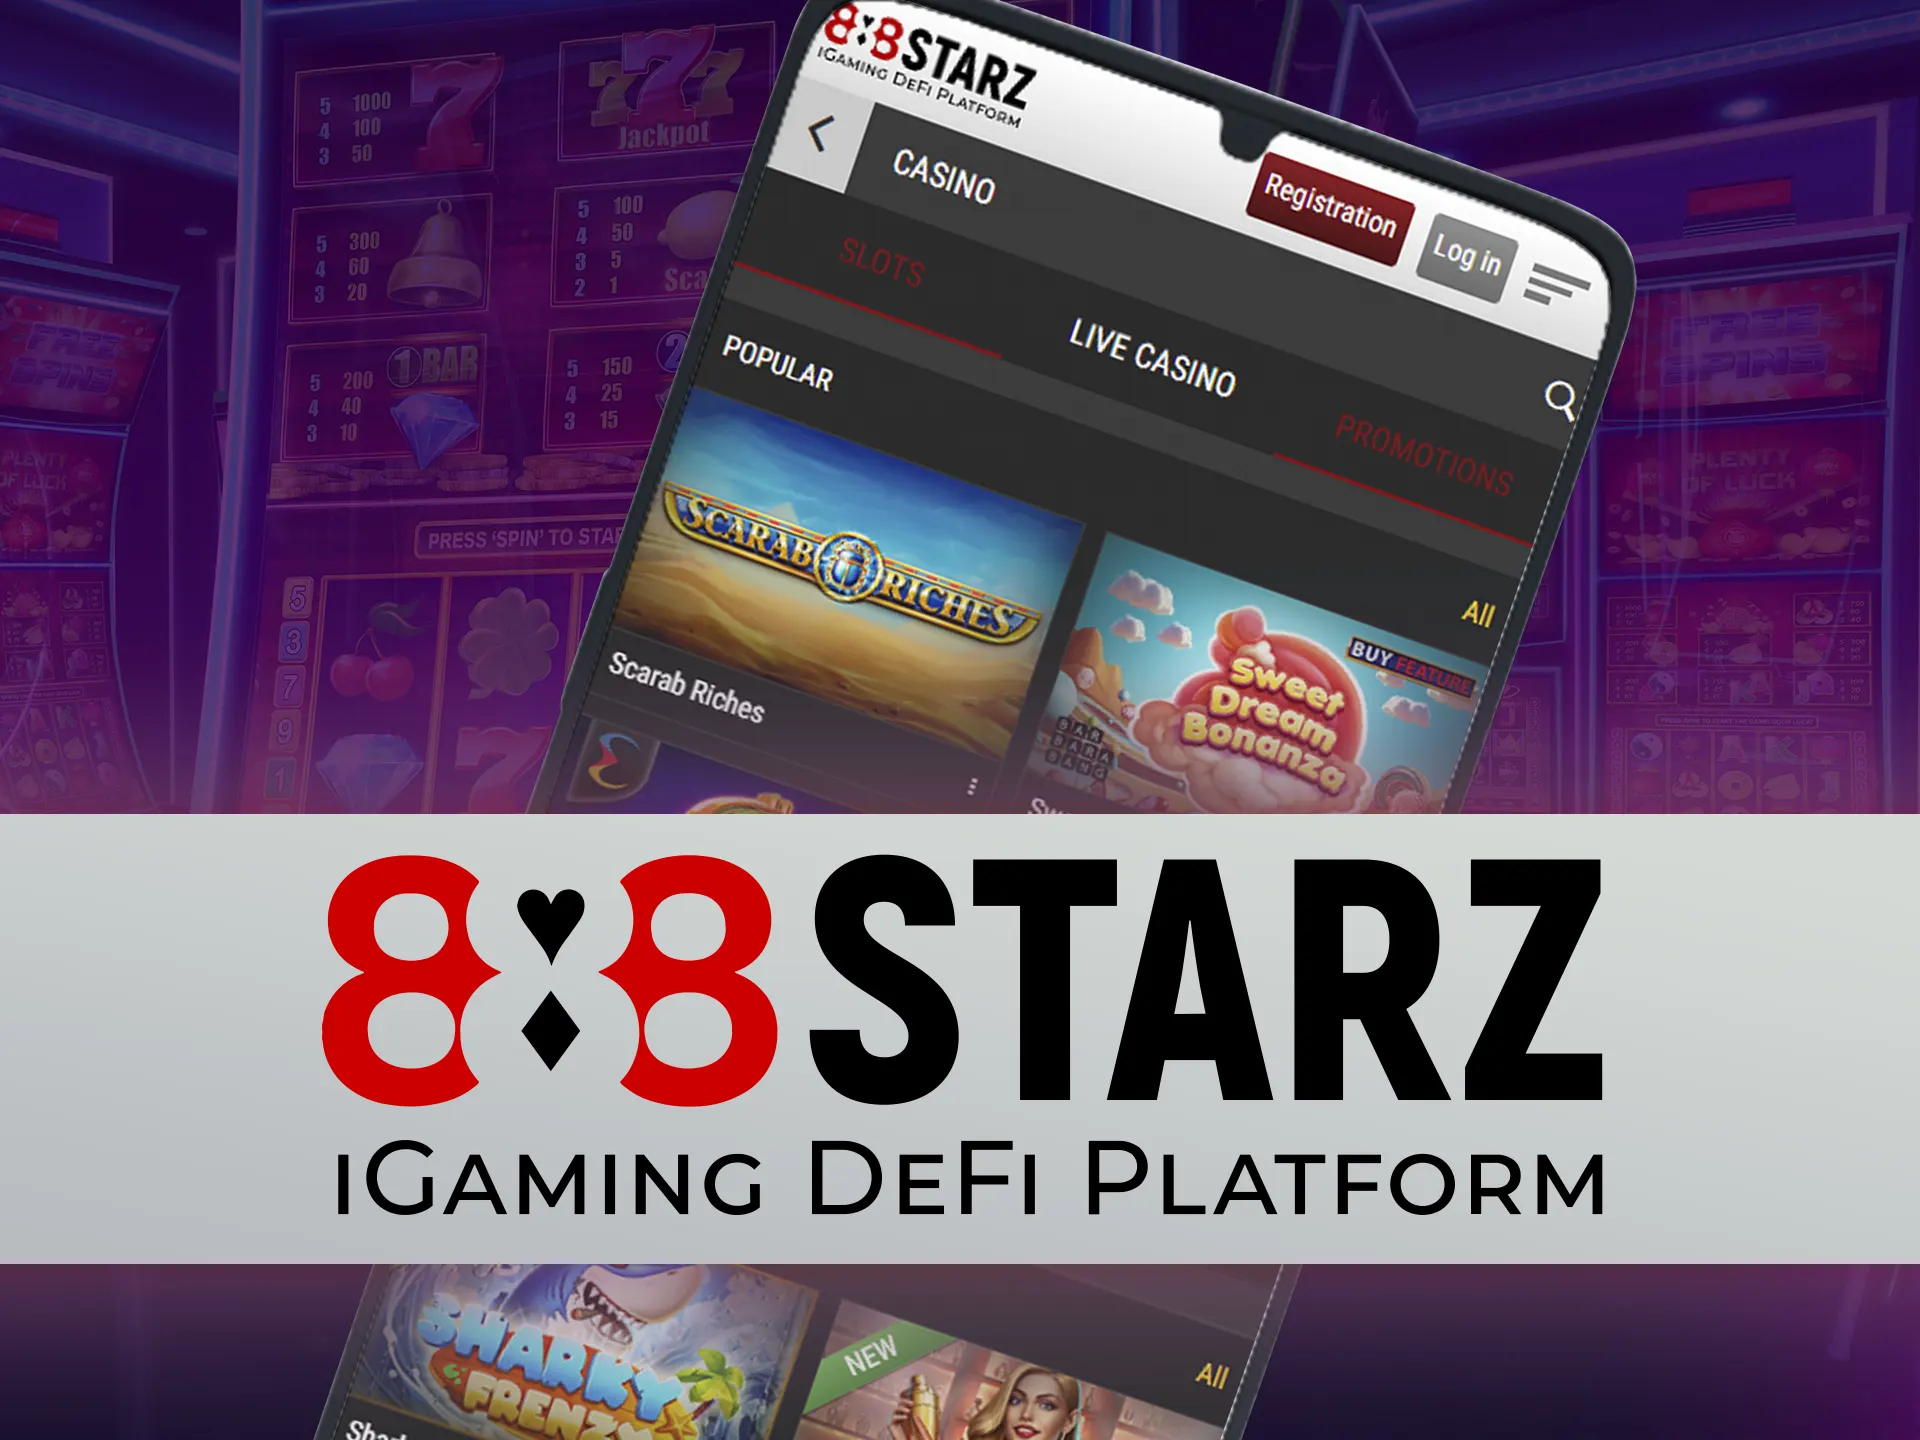 Choose to play any slots from the huge selection at 888stsrz app.